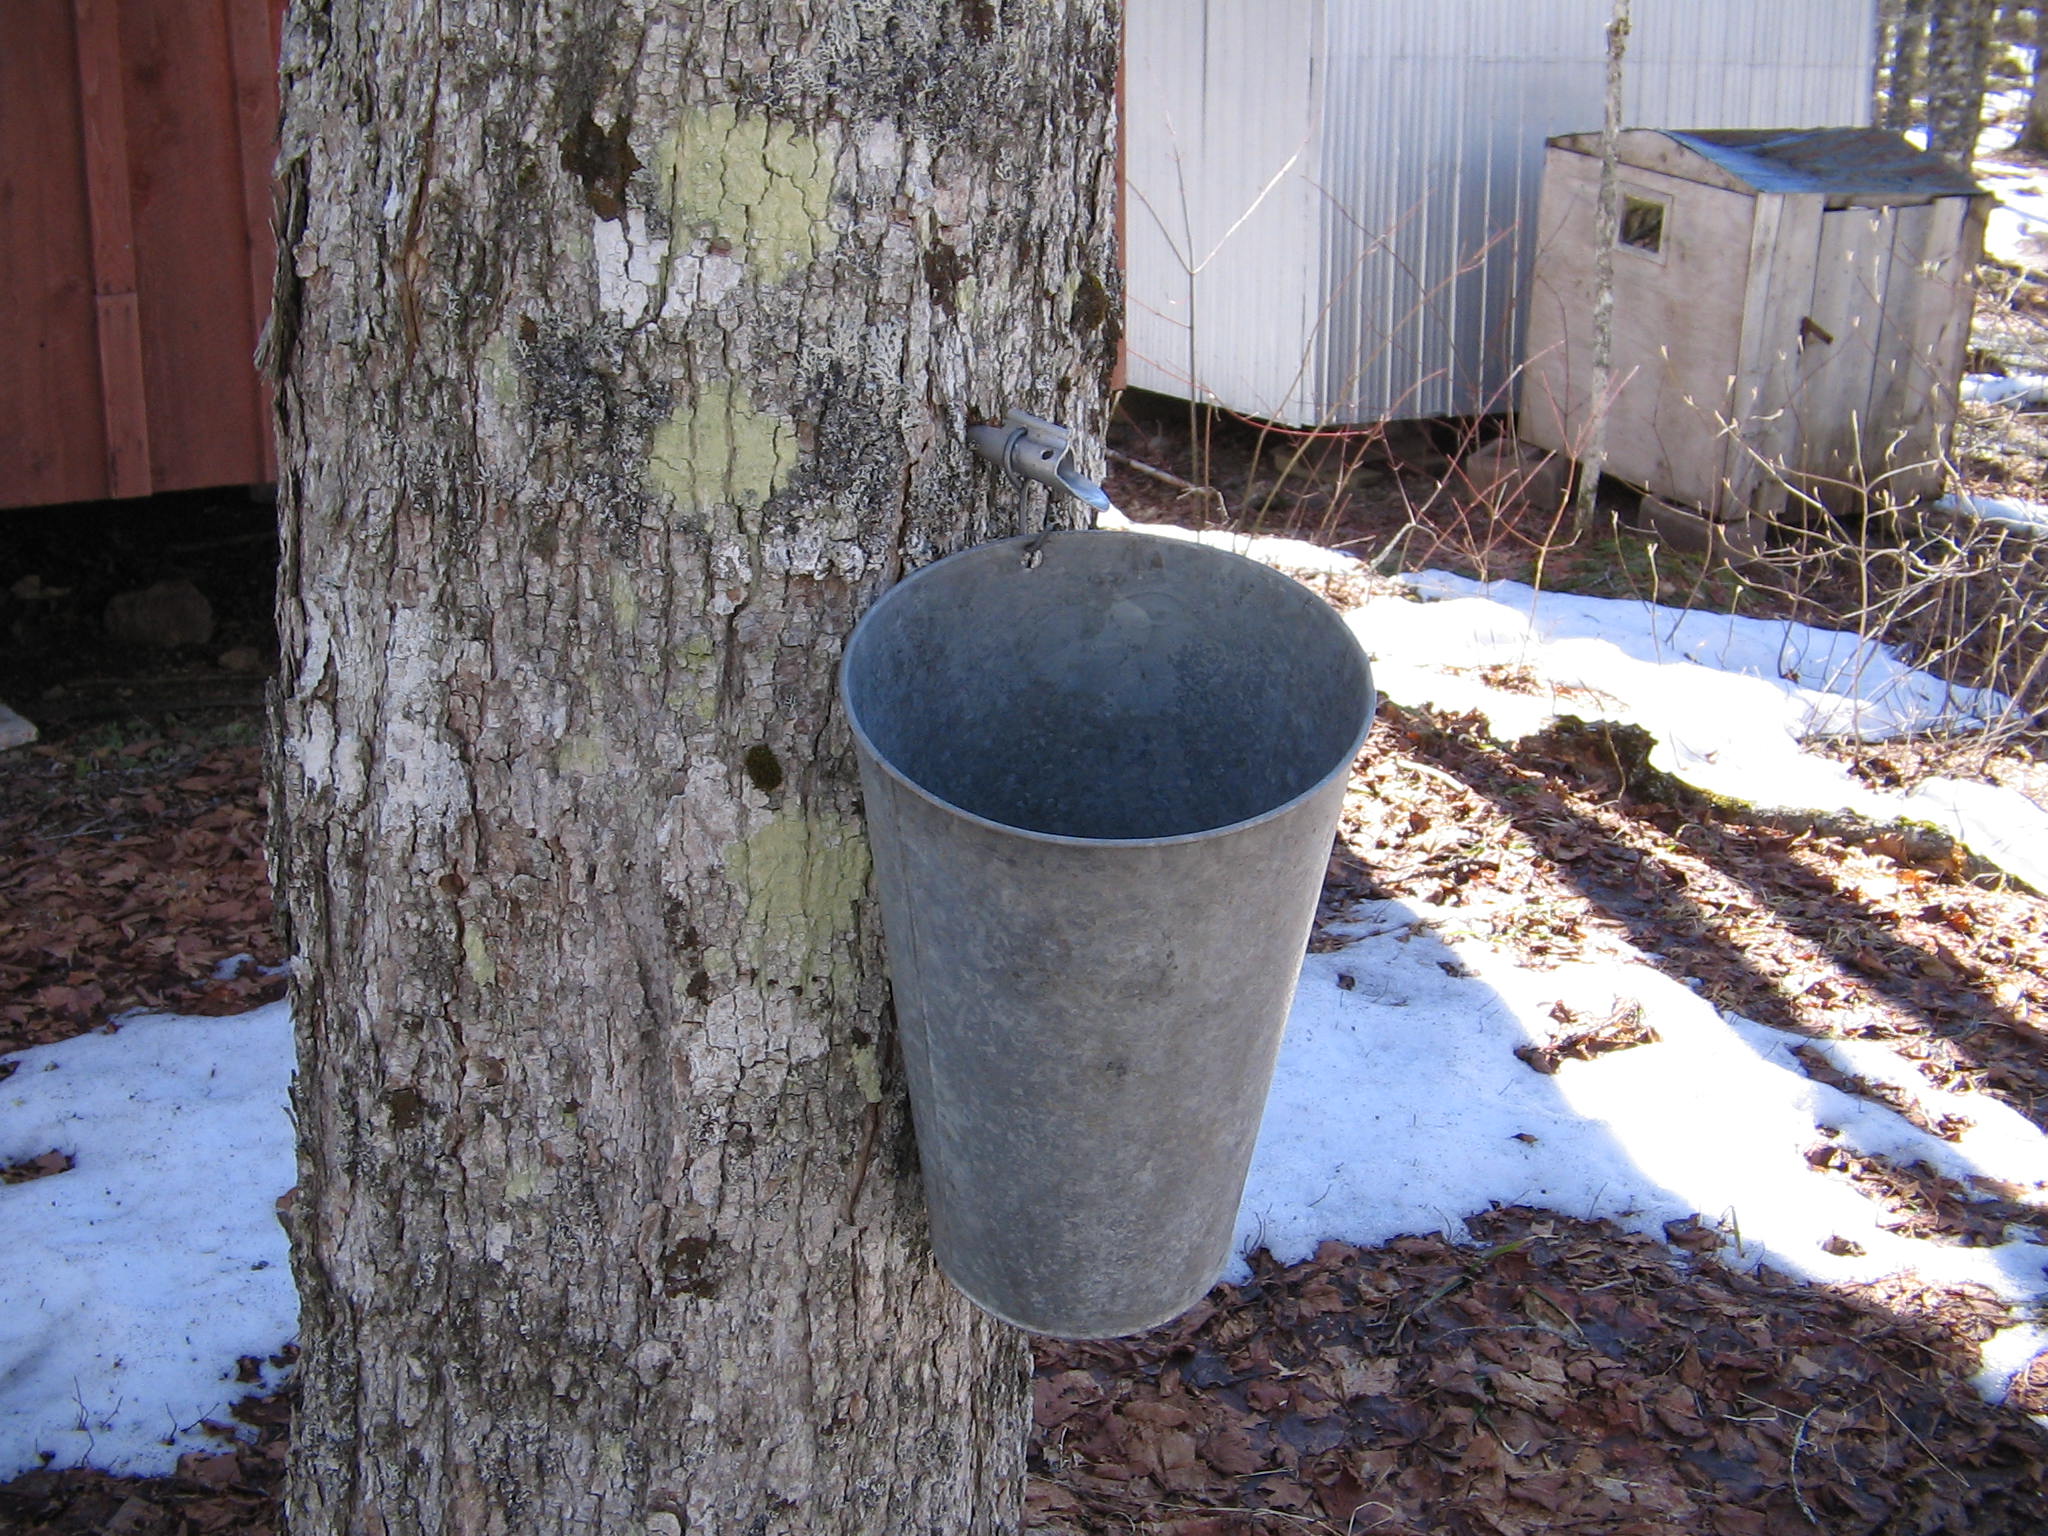 Here’s how to tap maple trees (and make your own syrup)